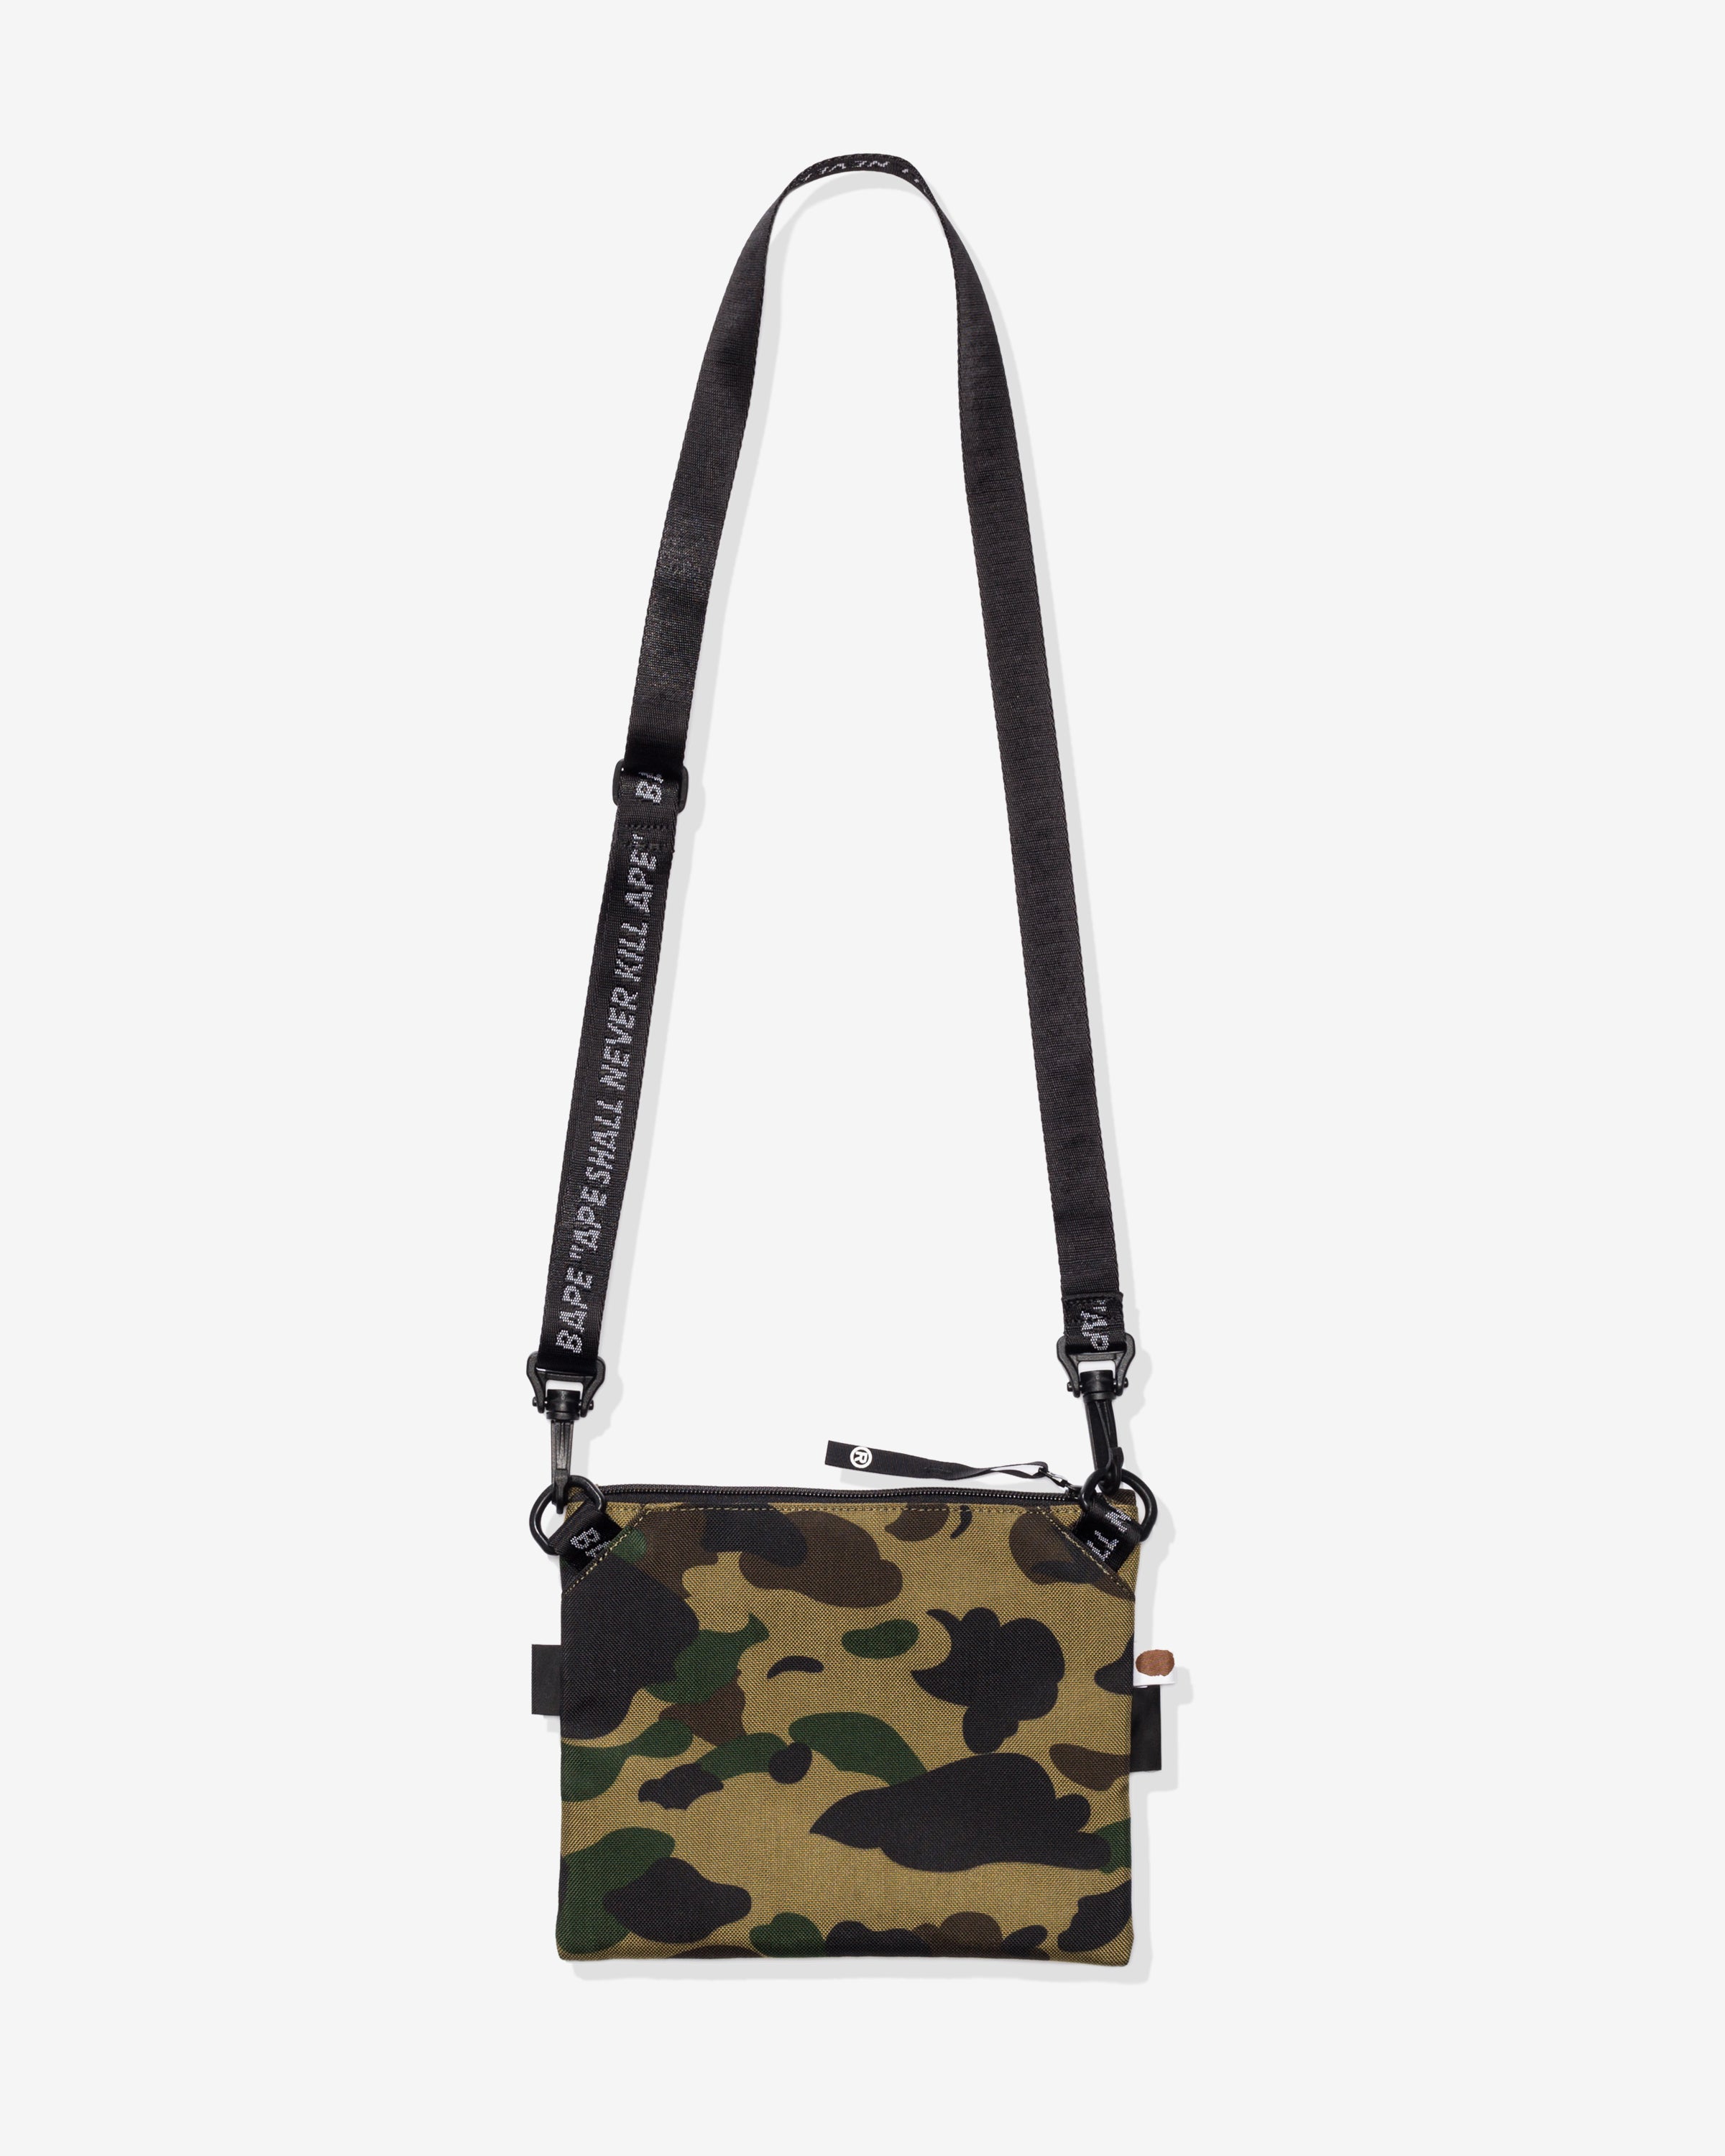 BAPE X OUTDOOR PRODUCTS 1ST CAMO DUFFEL - GREEN - - / OS